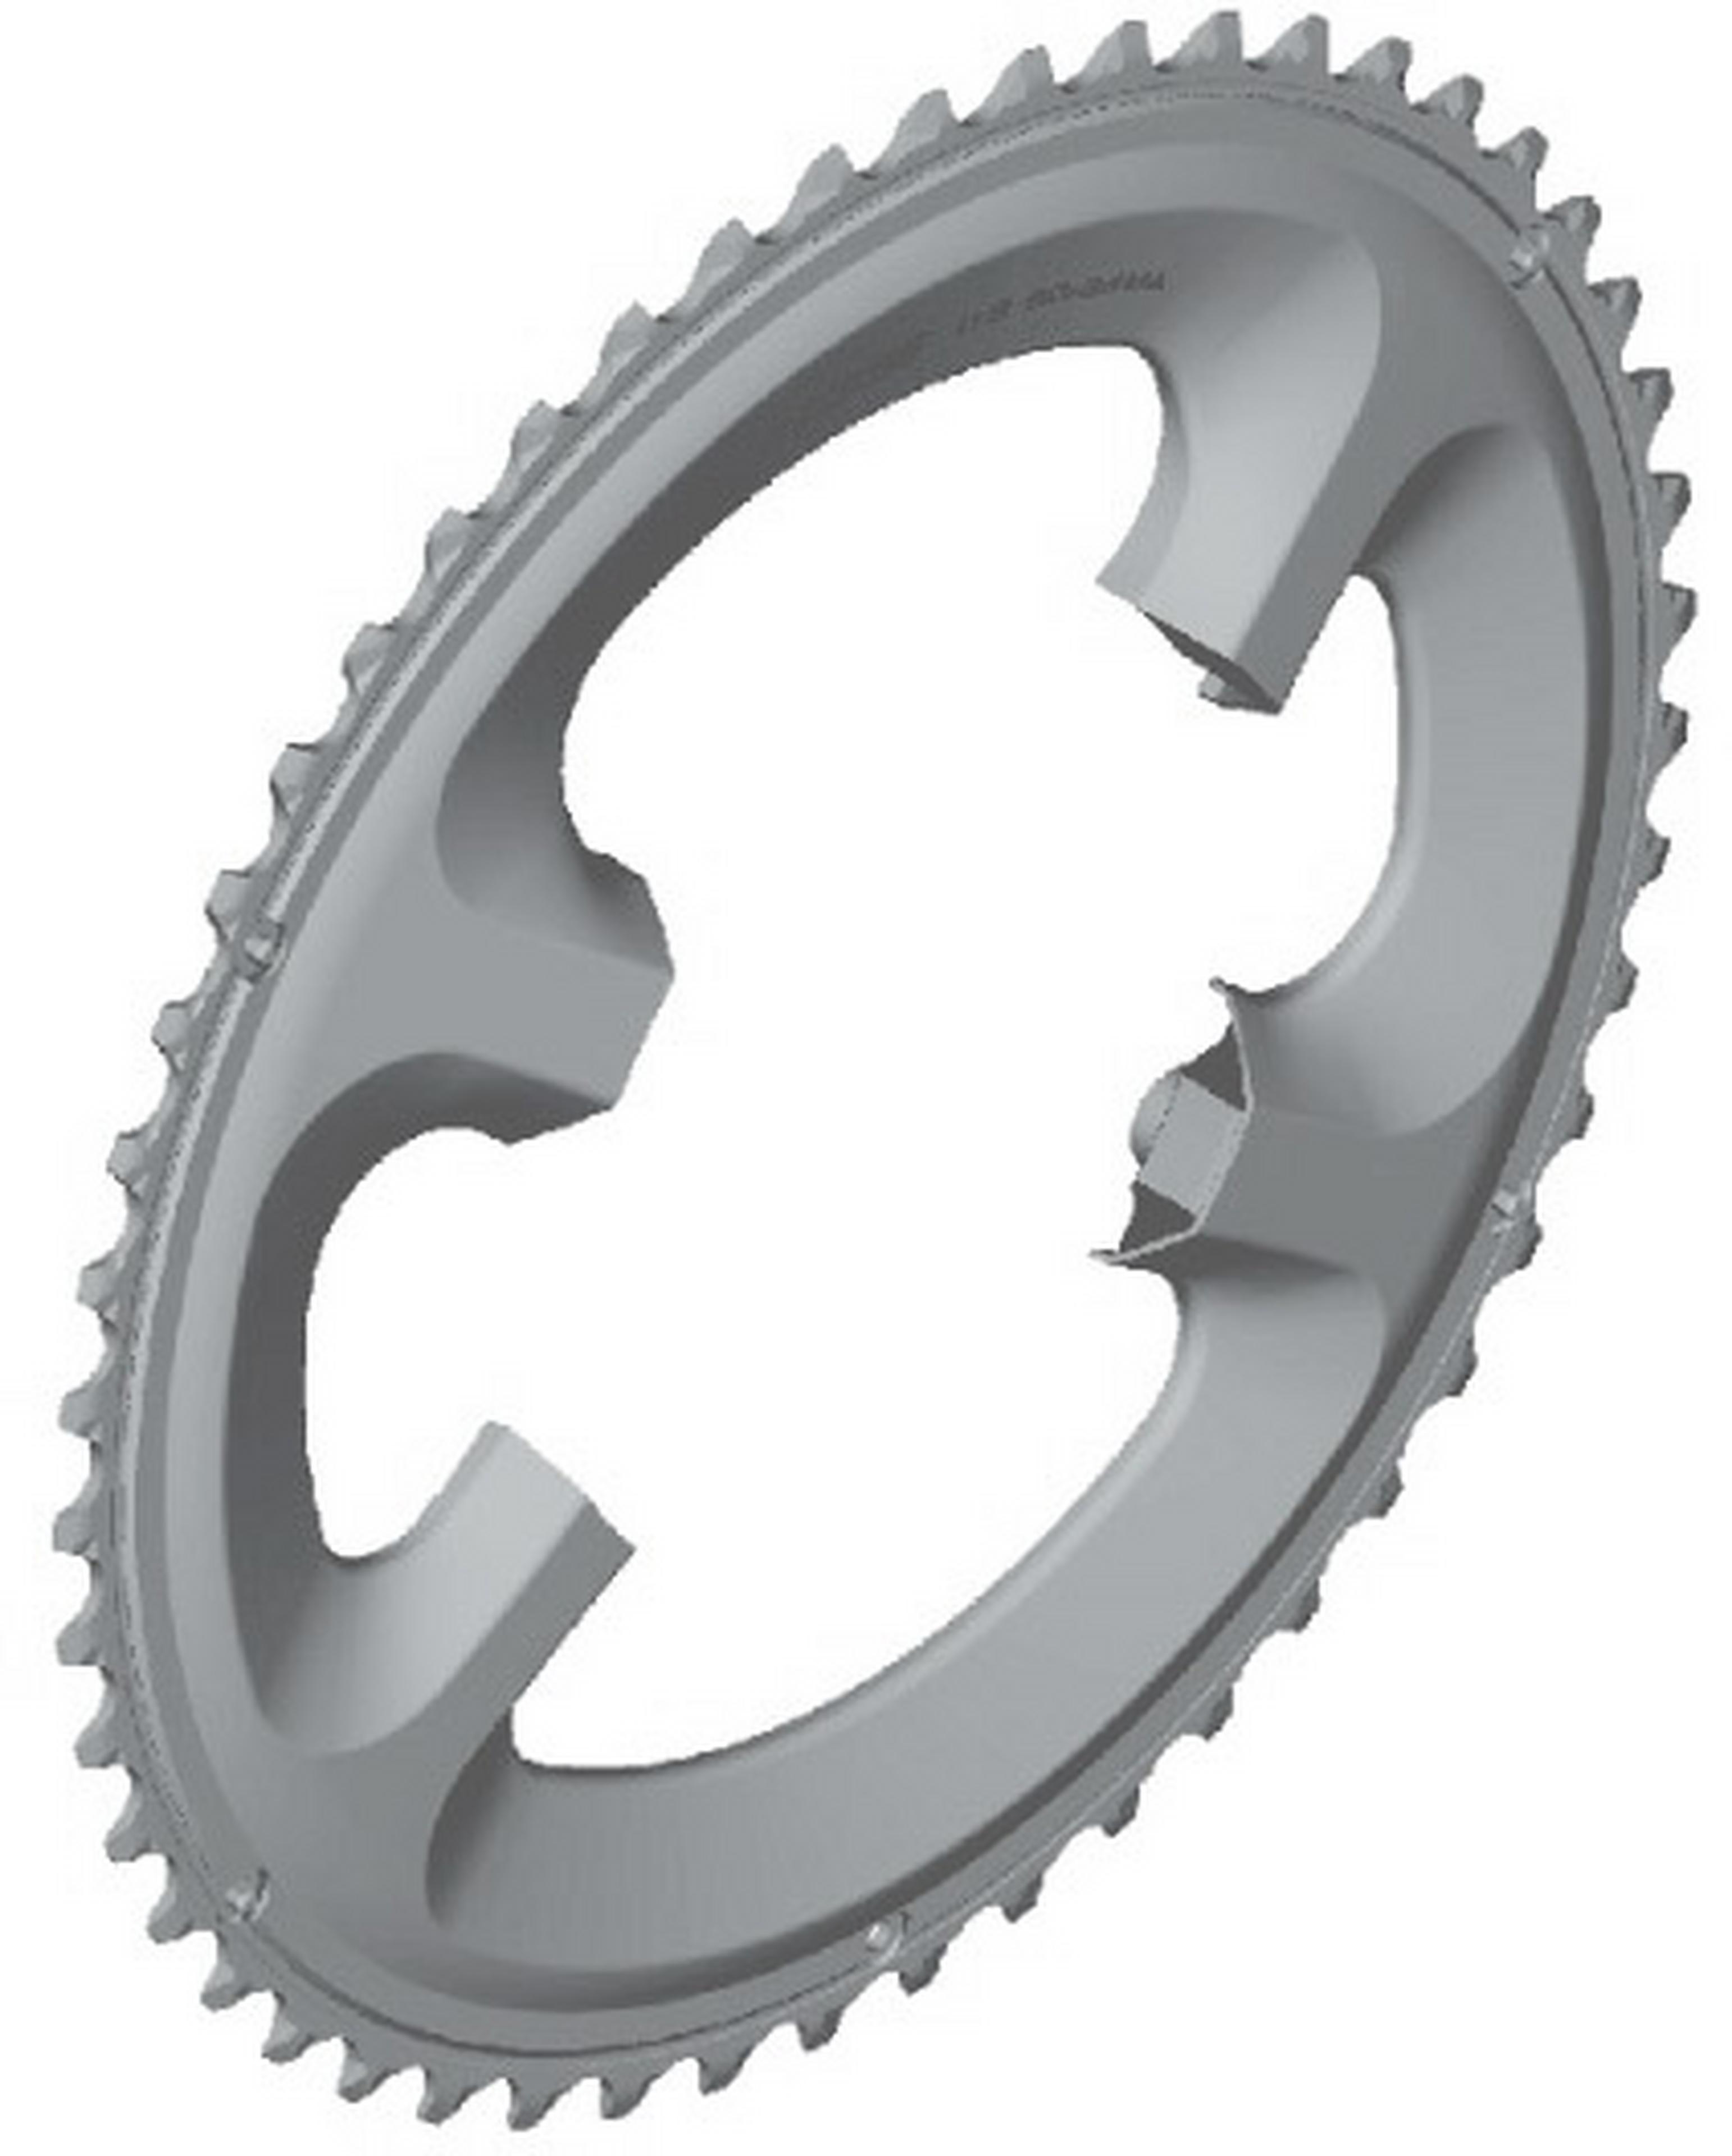 Shimano 105 5800 11 Speed Chainring | Wiggle